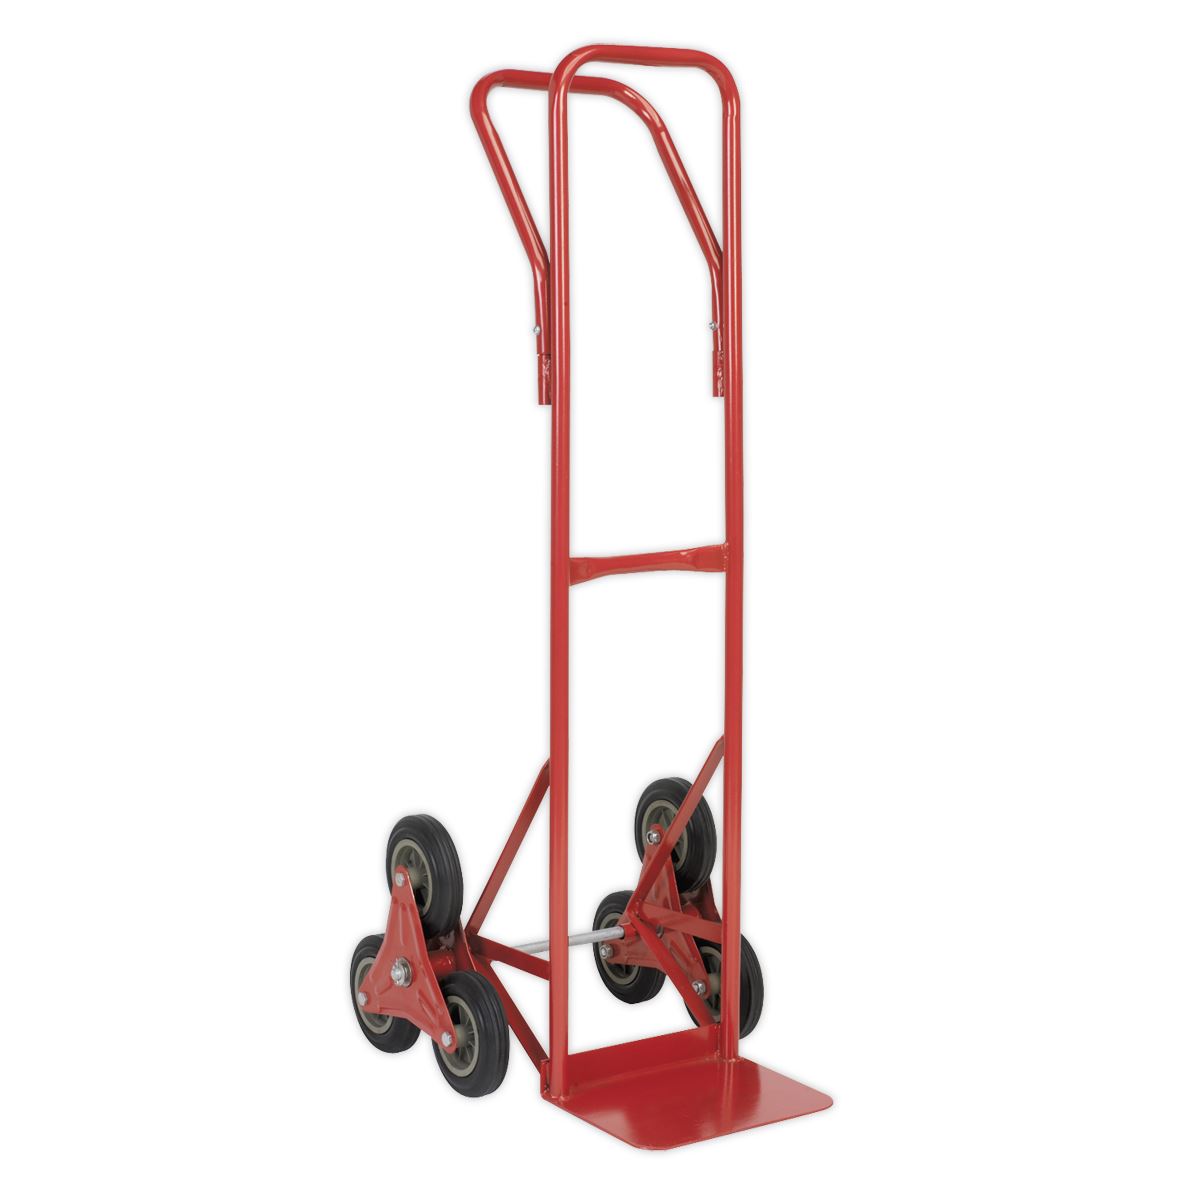 Sealey Sack Truck Stair Climbing with Solid Tyres 150kg Capacity